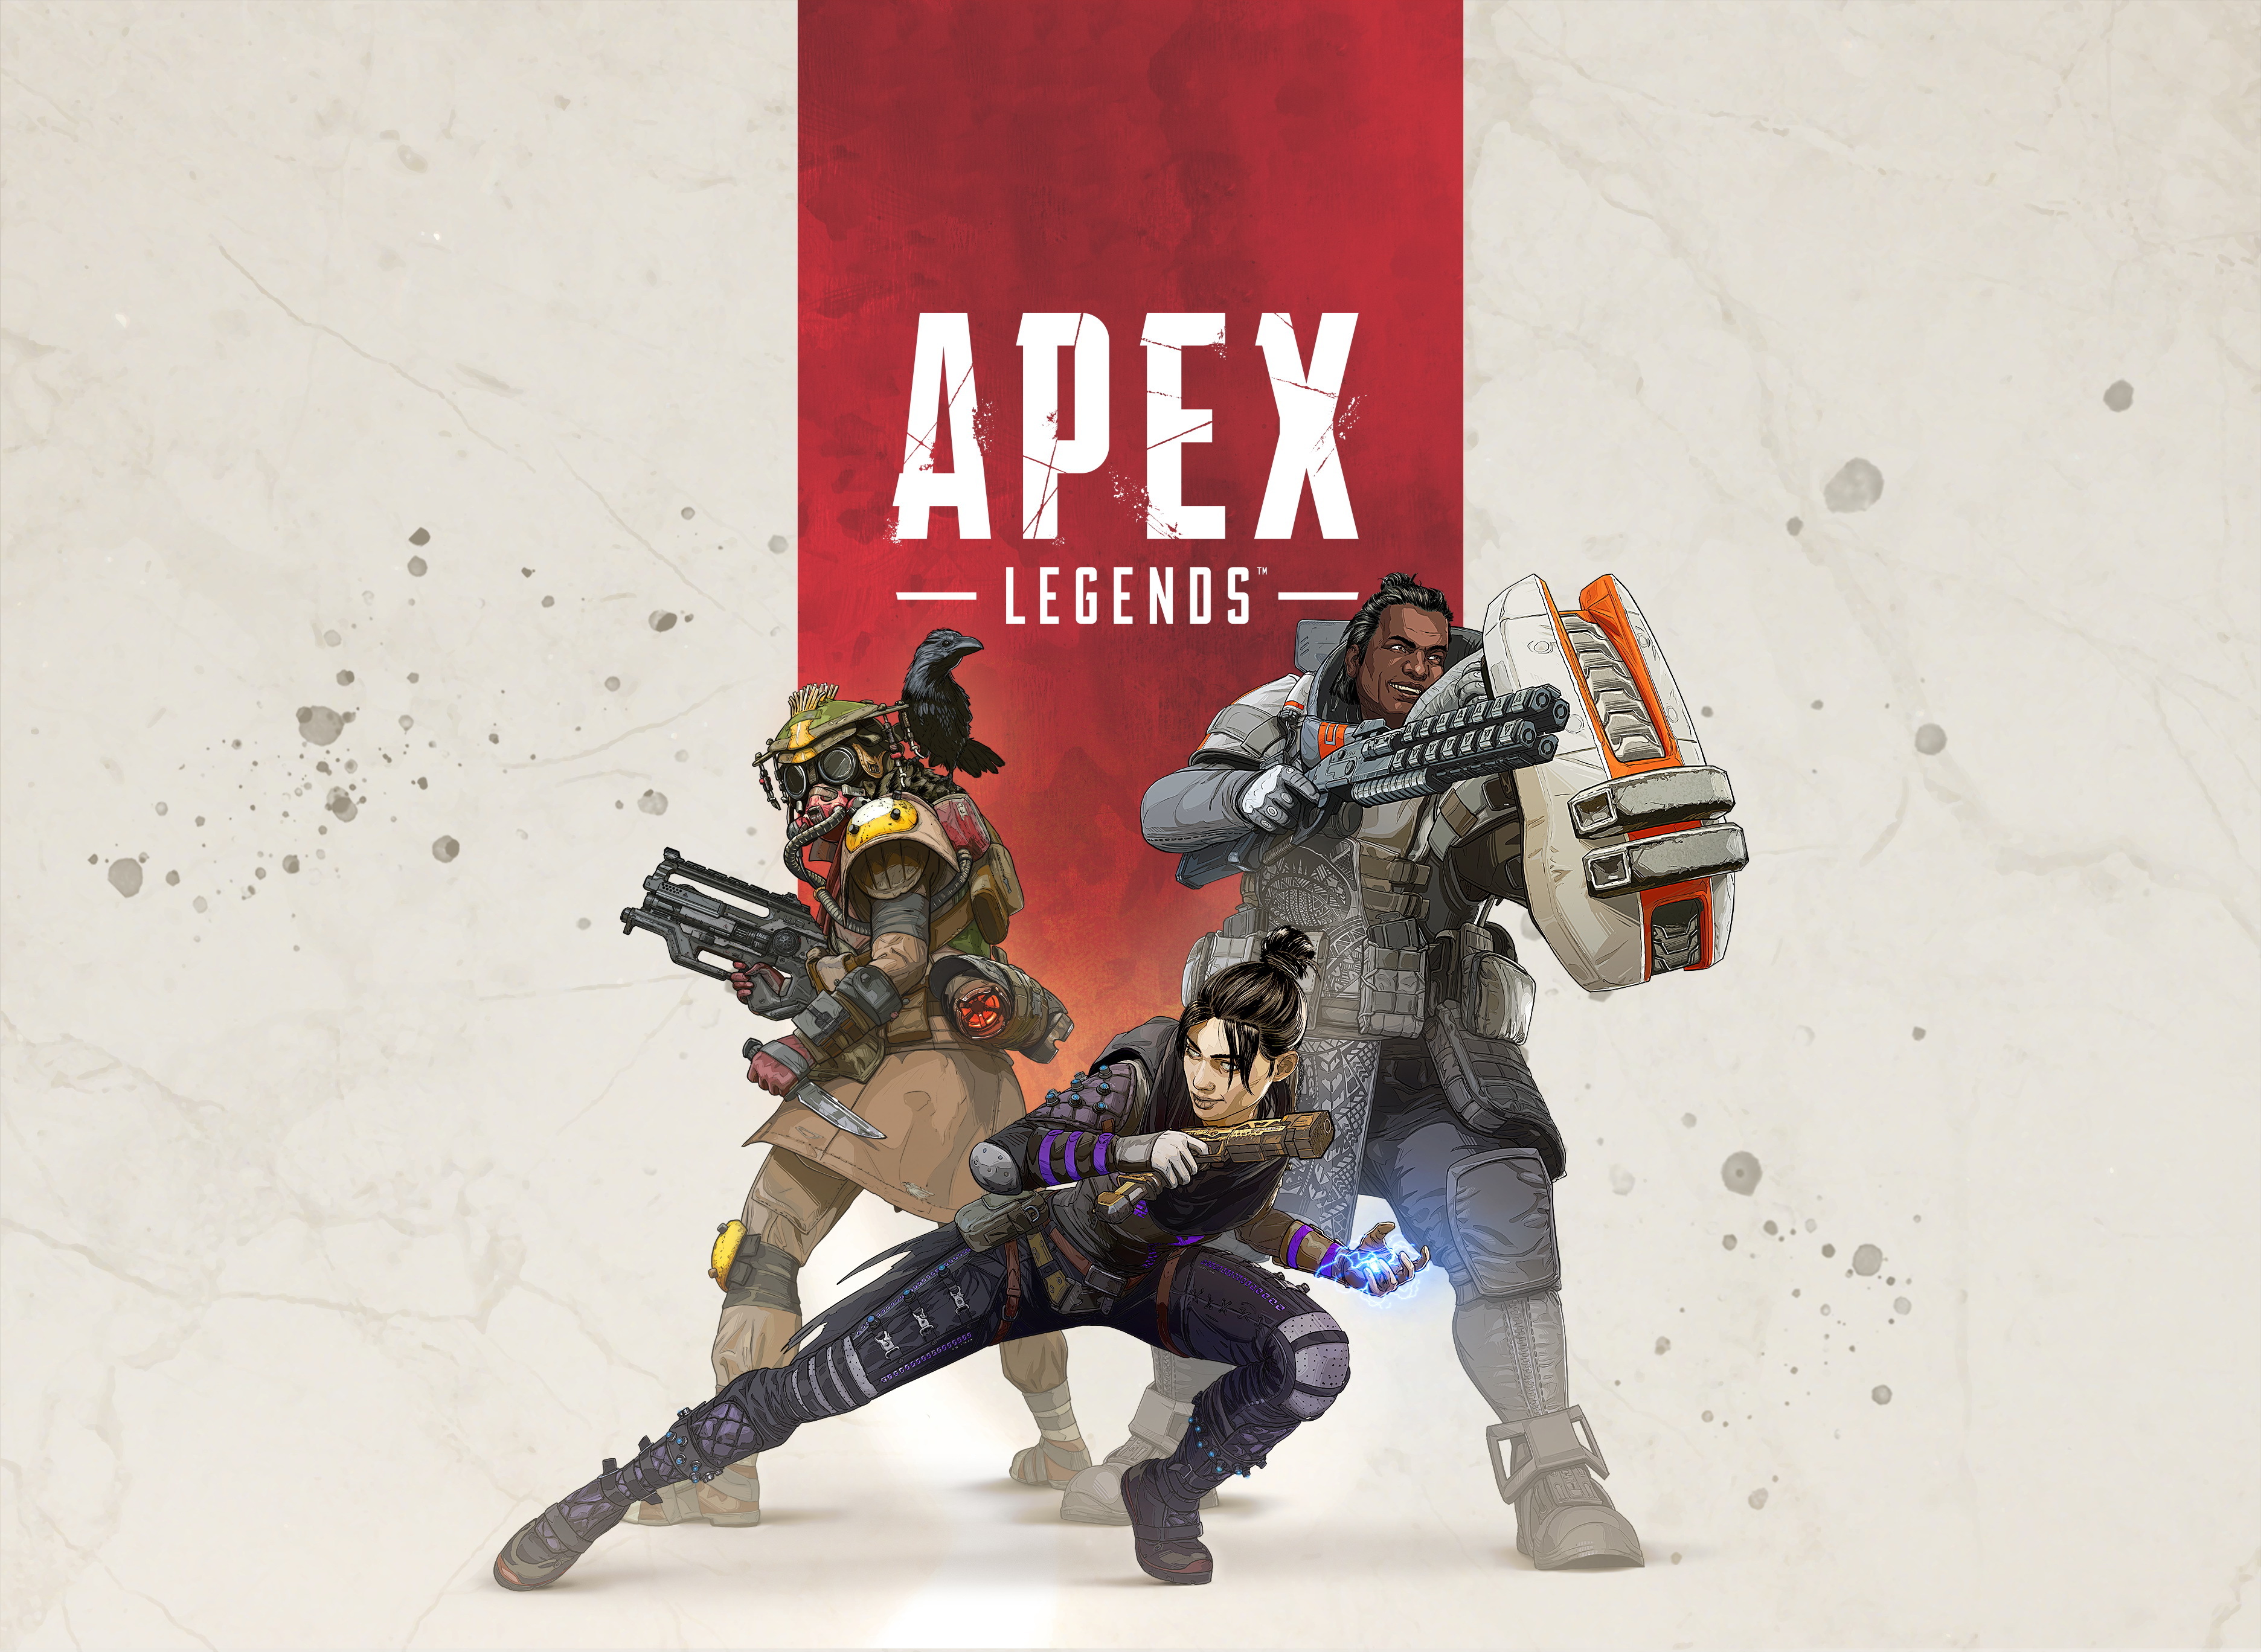 Respawn Entertainment Releases Apex Legends Update 1.22, It Brings New Fight Or Fright Event, And More